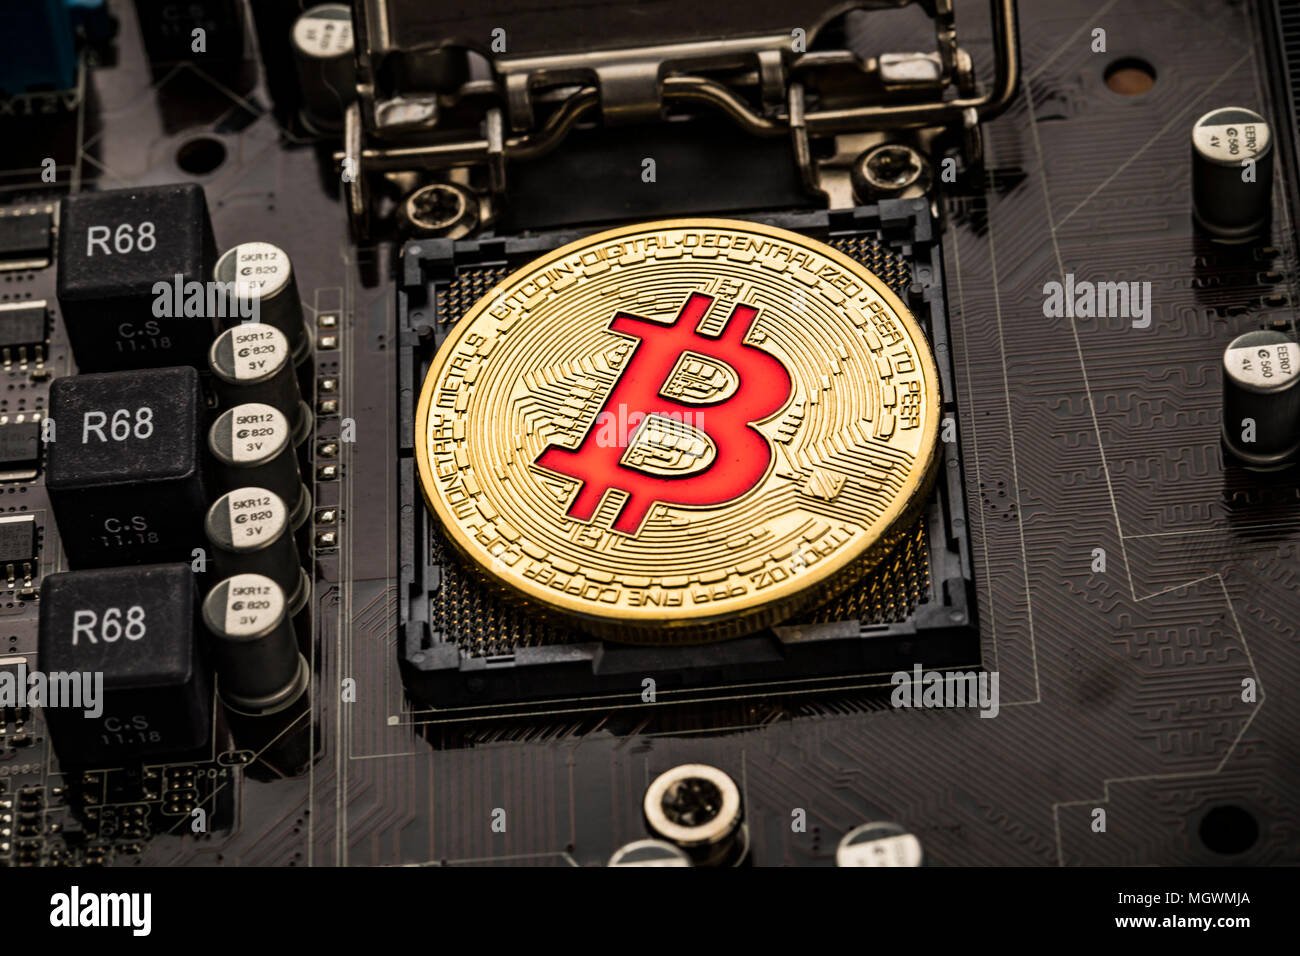 Gold Bit Coin BTC coins on the motherboard. Bitcoin is a worldwide cryptocurrency and digital payment system called the first decentralized digital cu Stock Photo